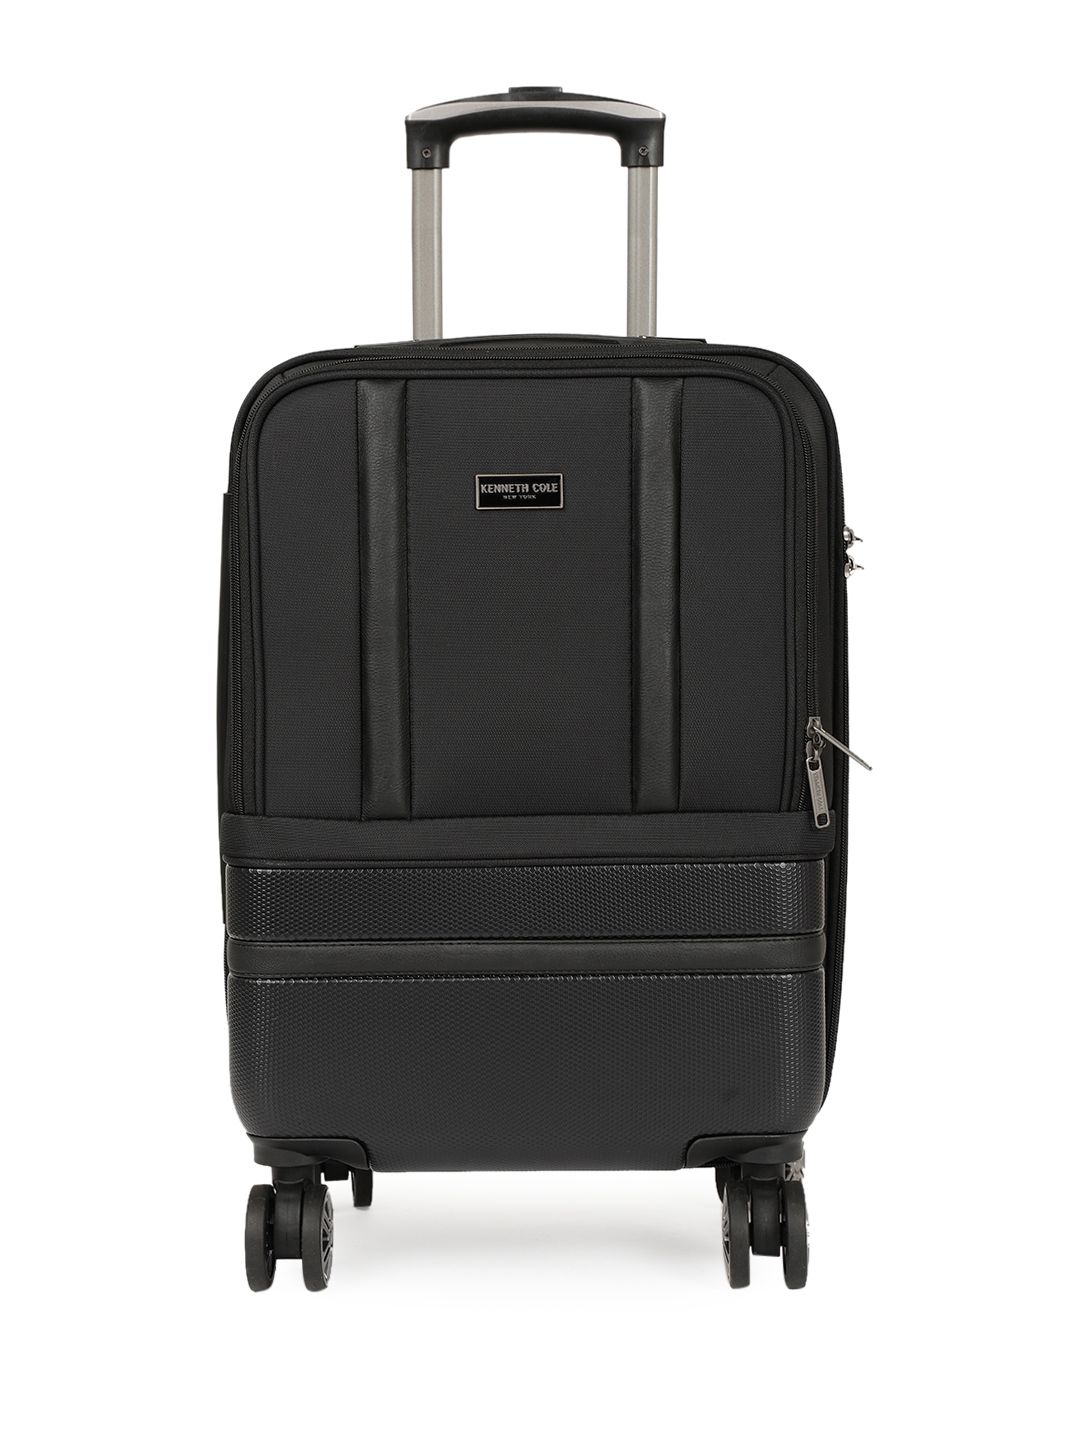 Kenneth Cole New York Black Textured 20" Cabin Trolley Suitcase Price in India